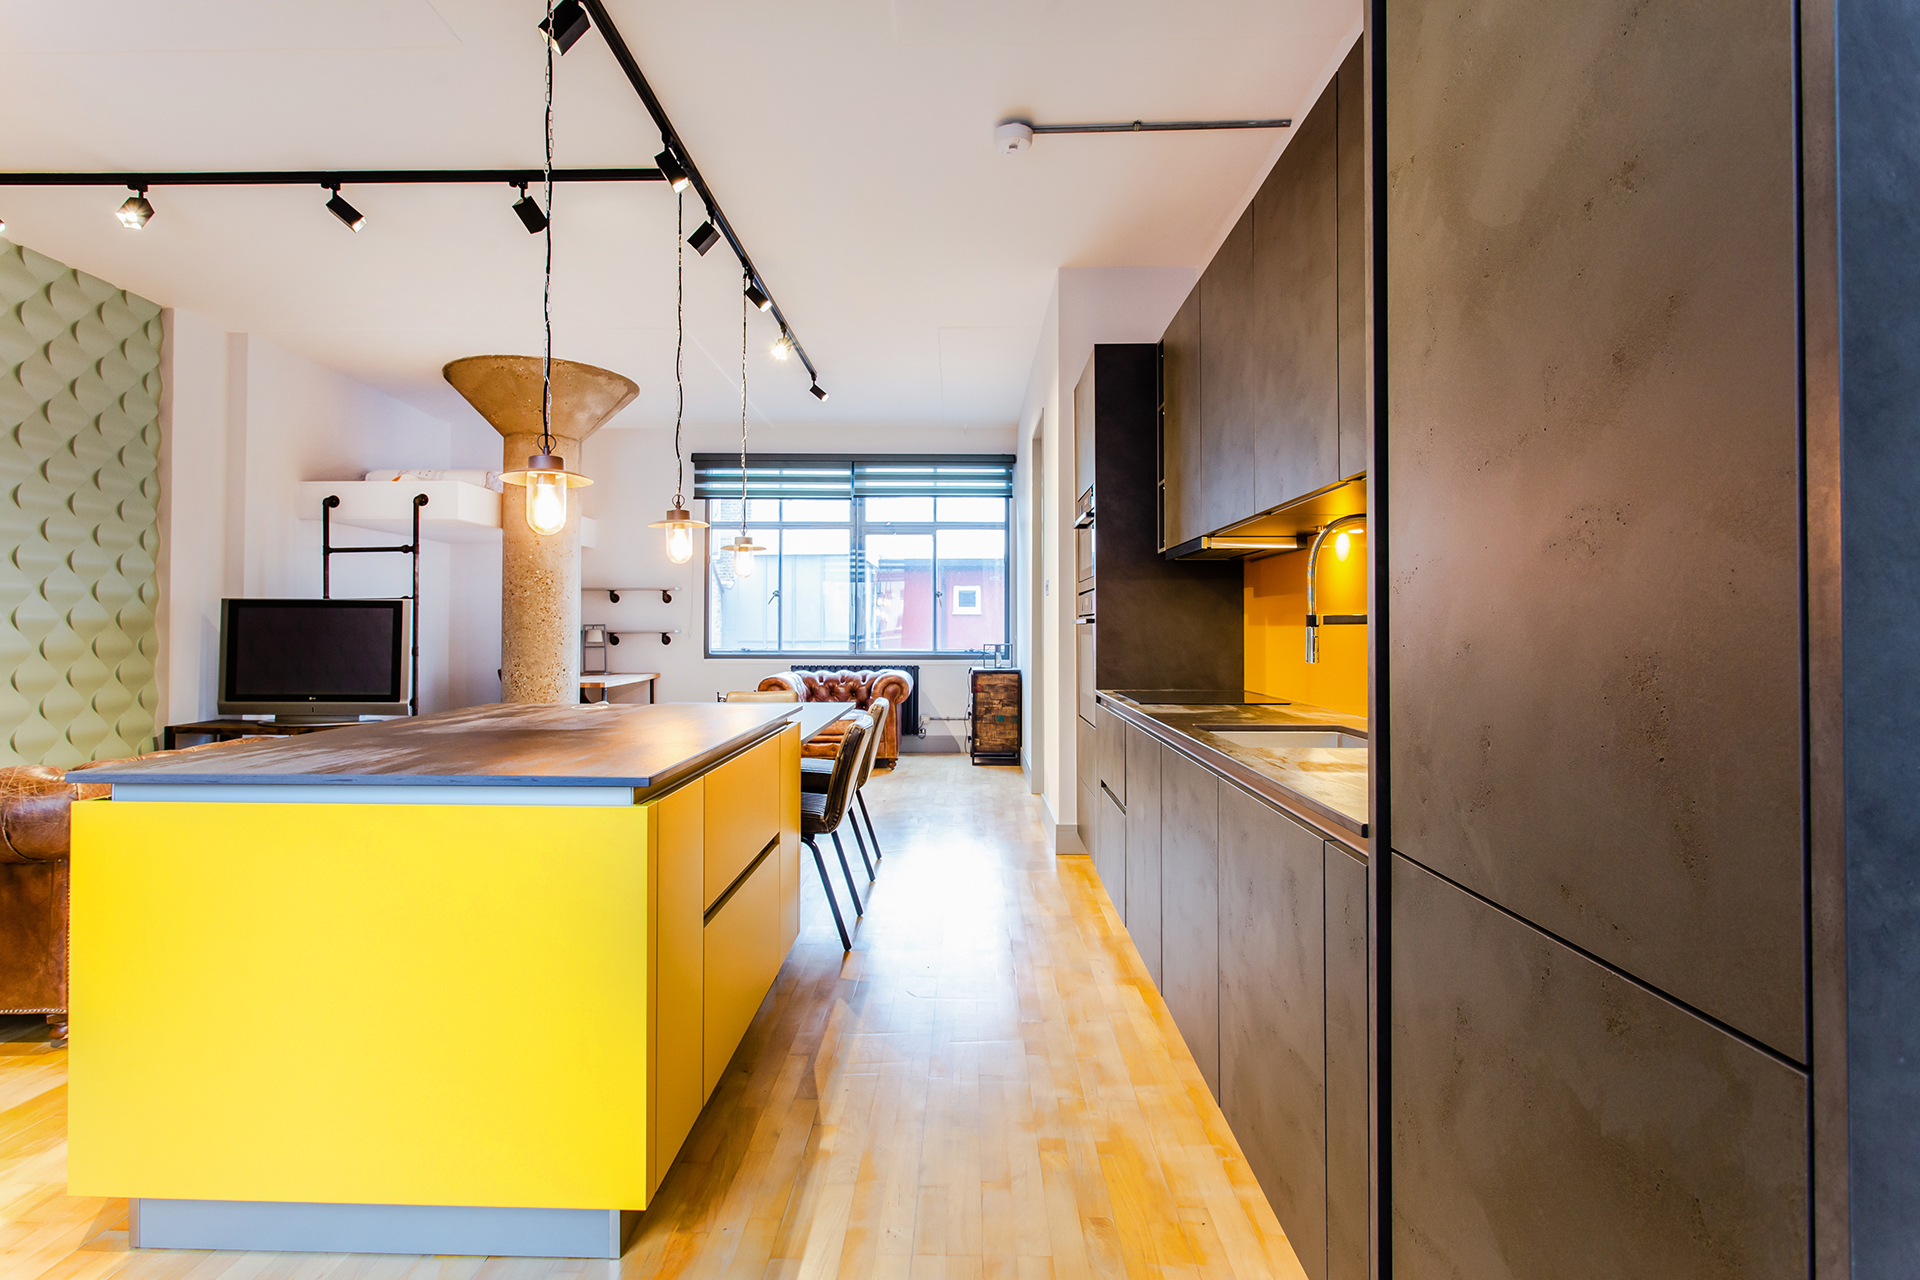 C&C kitchens Hertfordshire - Nolte Kitchens Polished Concrete and Curry